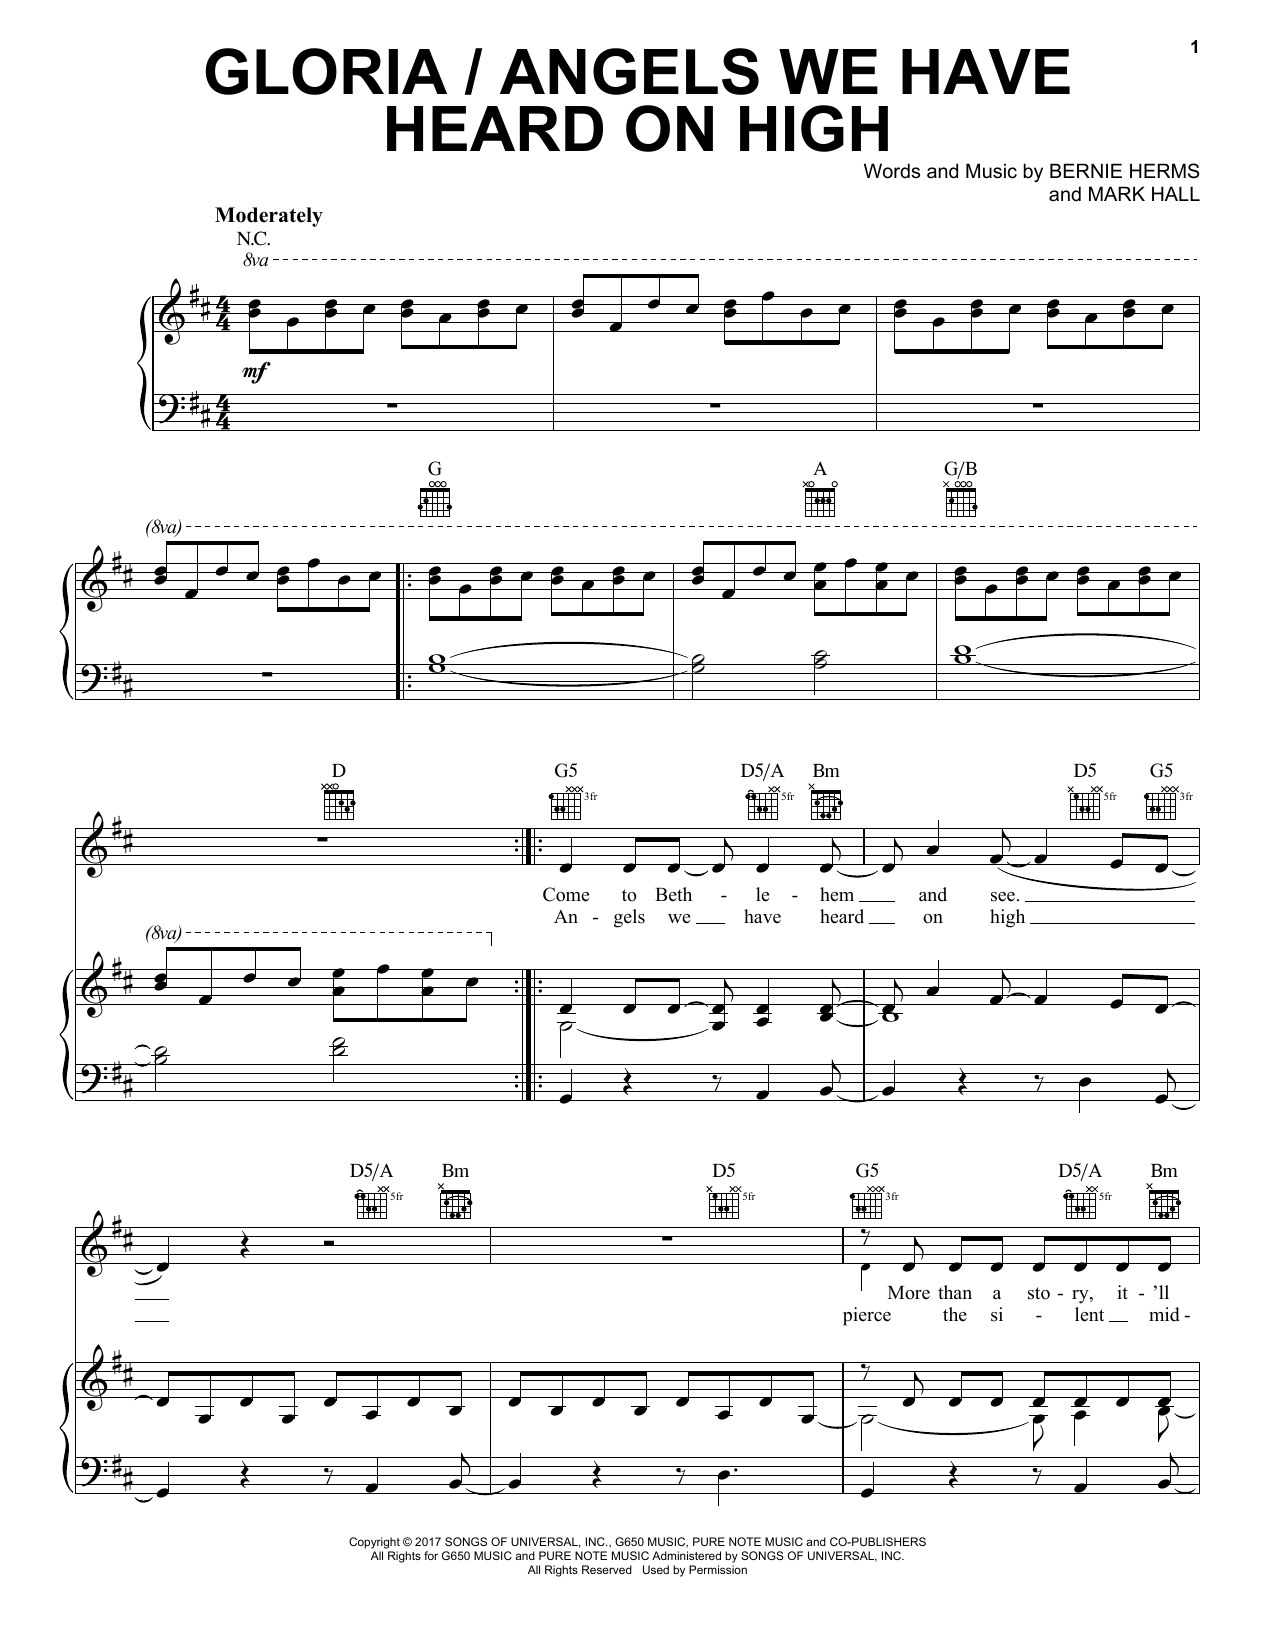 Download Casting Crowns Gloria / Angels We Have Heard On High Sheet Music